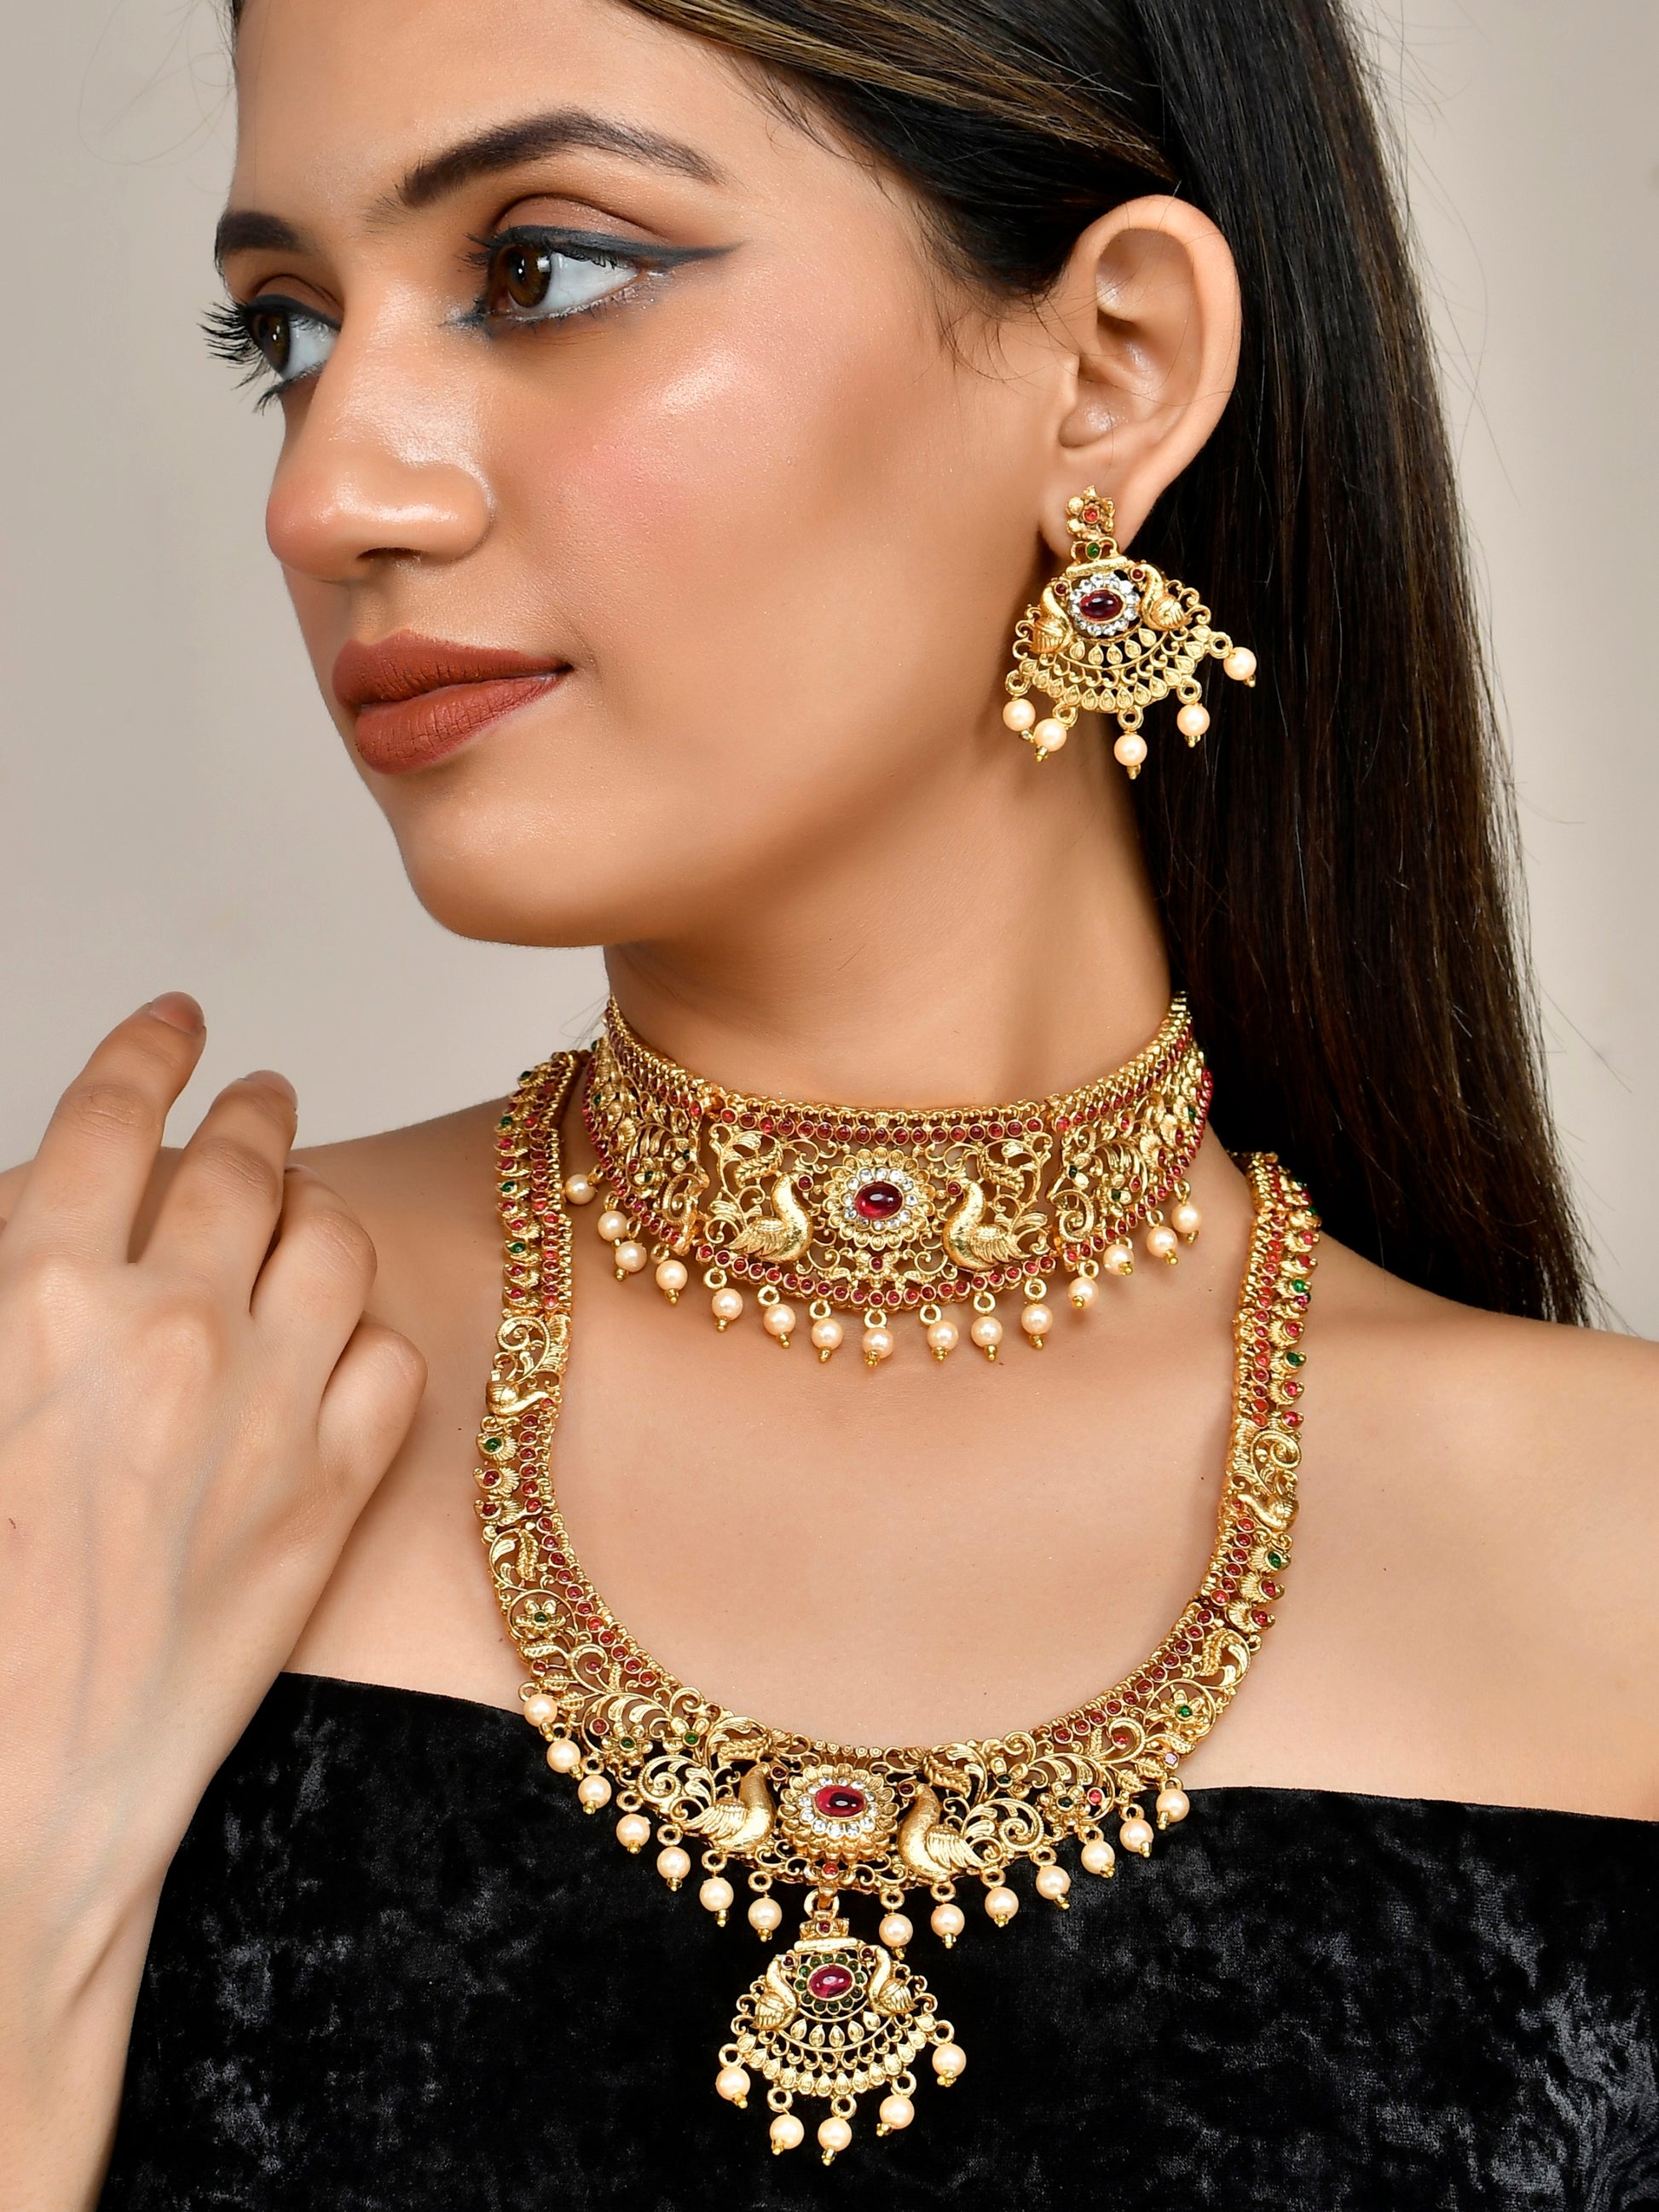 South Indian Double Necklace Jewellery Set